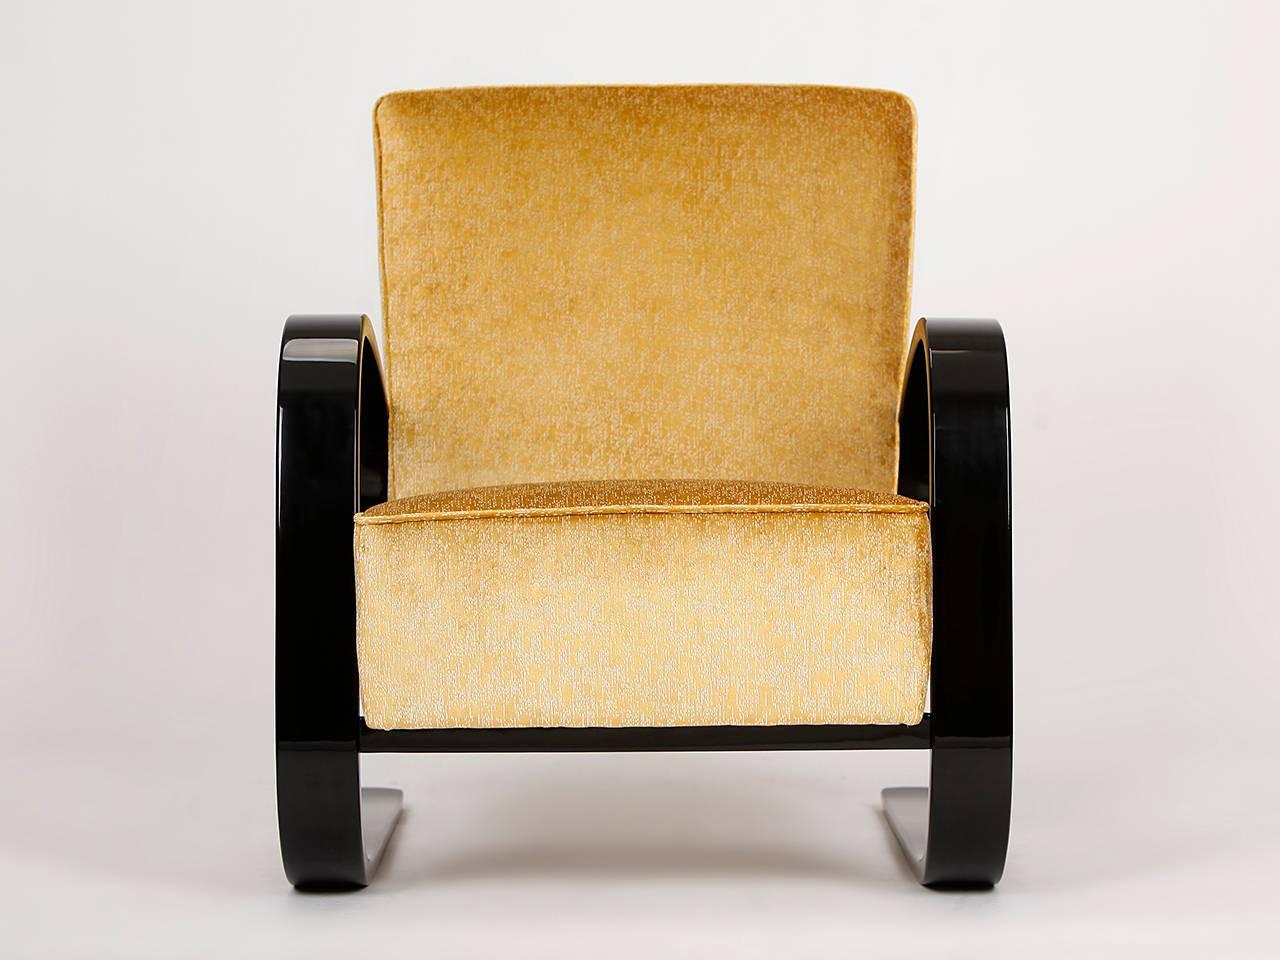 Designed by Miroslav Navratil for Spojene UP Zavody in the 1950s. Completely restored with black lacquered armrests and a new spring core. Upholstered with a gold-colored fabric by Larsen.
We offer shop to door delivery worldwide. Please ask for a